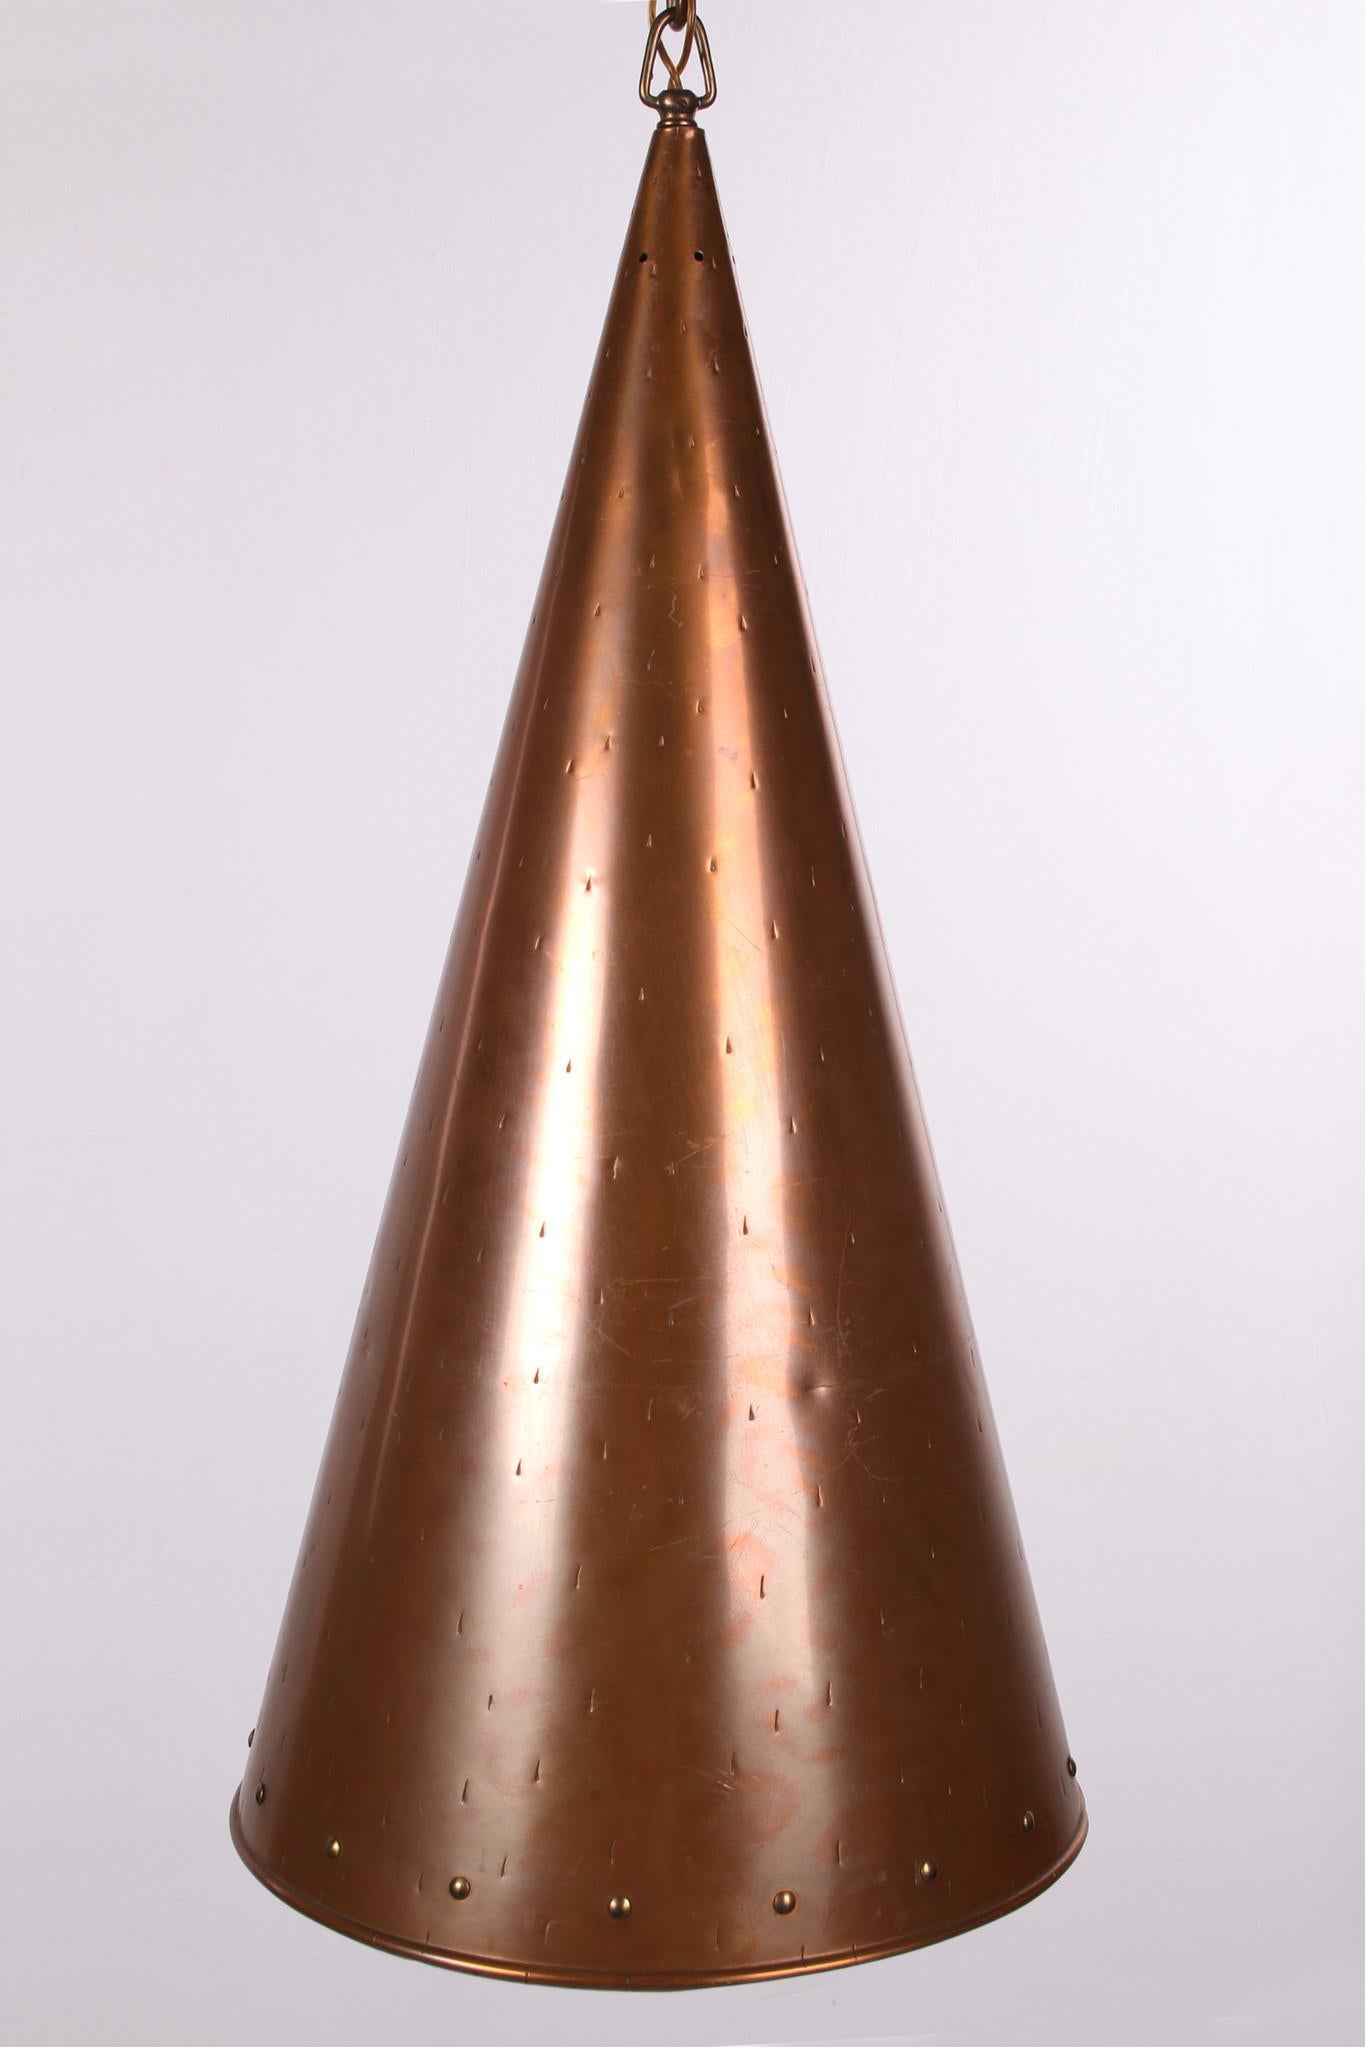 Danish Hand Hammered Copper Pendant Lamp from E.S Horn Aalestrup, 50s For Sale 5